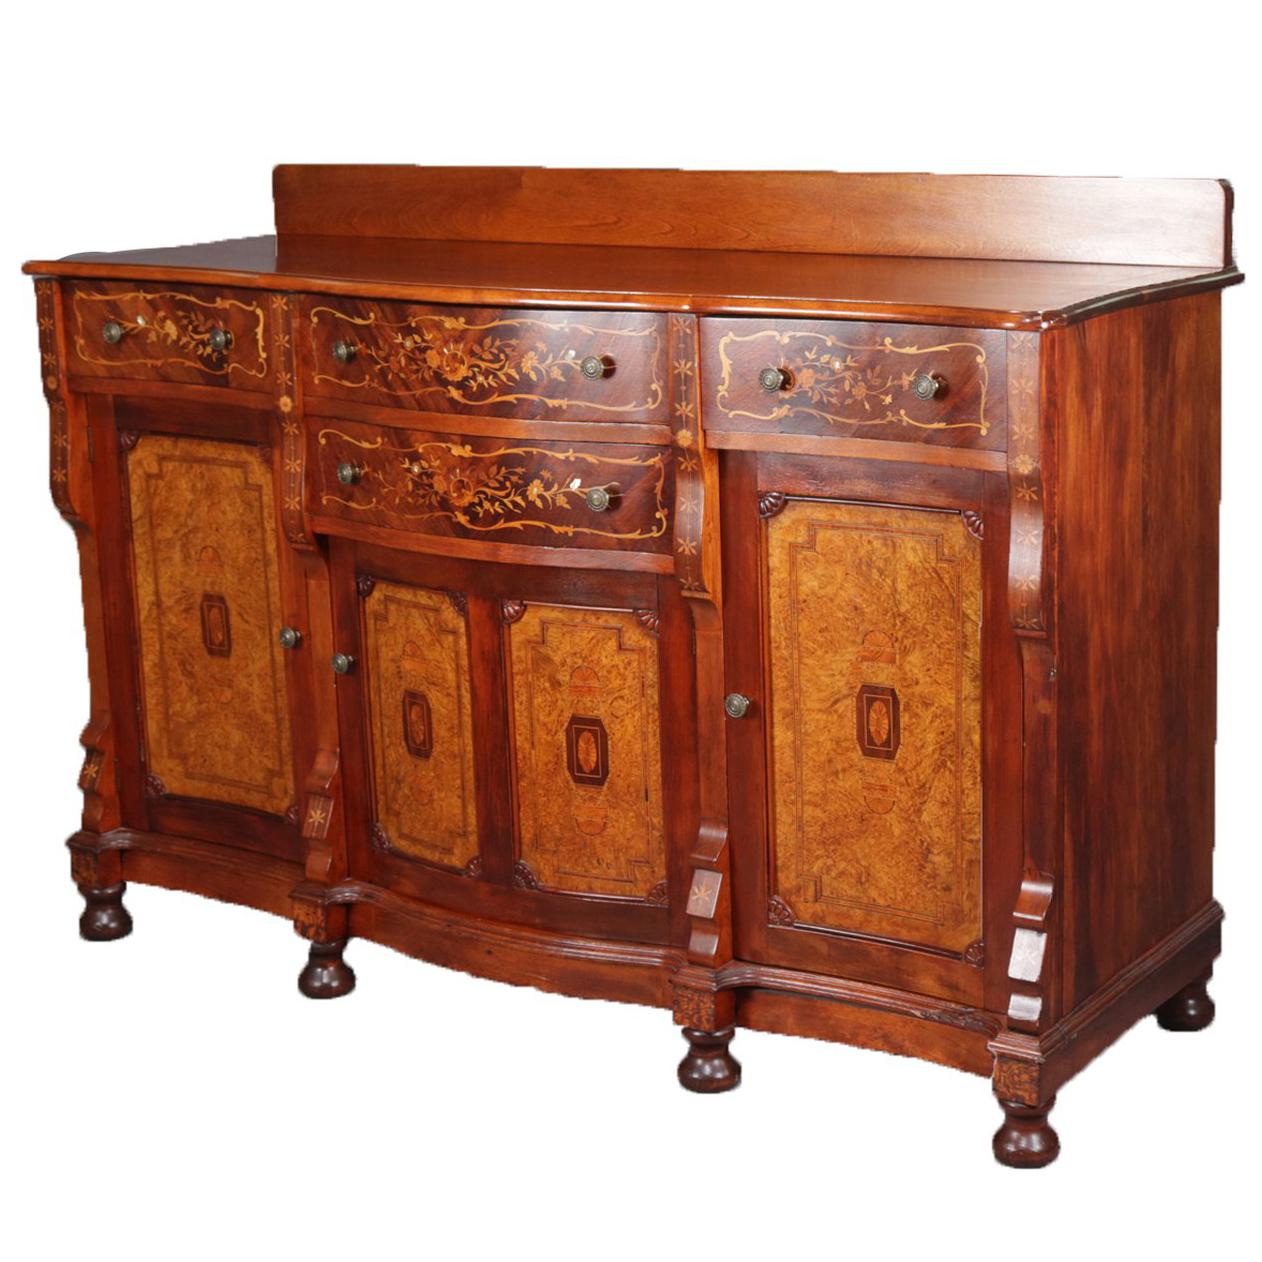 Antique Horner School Inlaid Mahogany and Burl Foliate Marquetry Sideboard